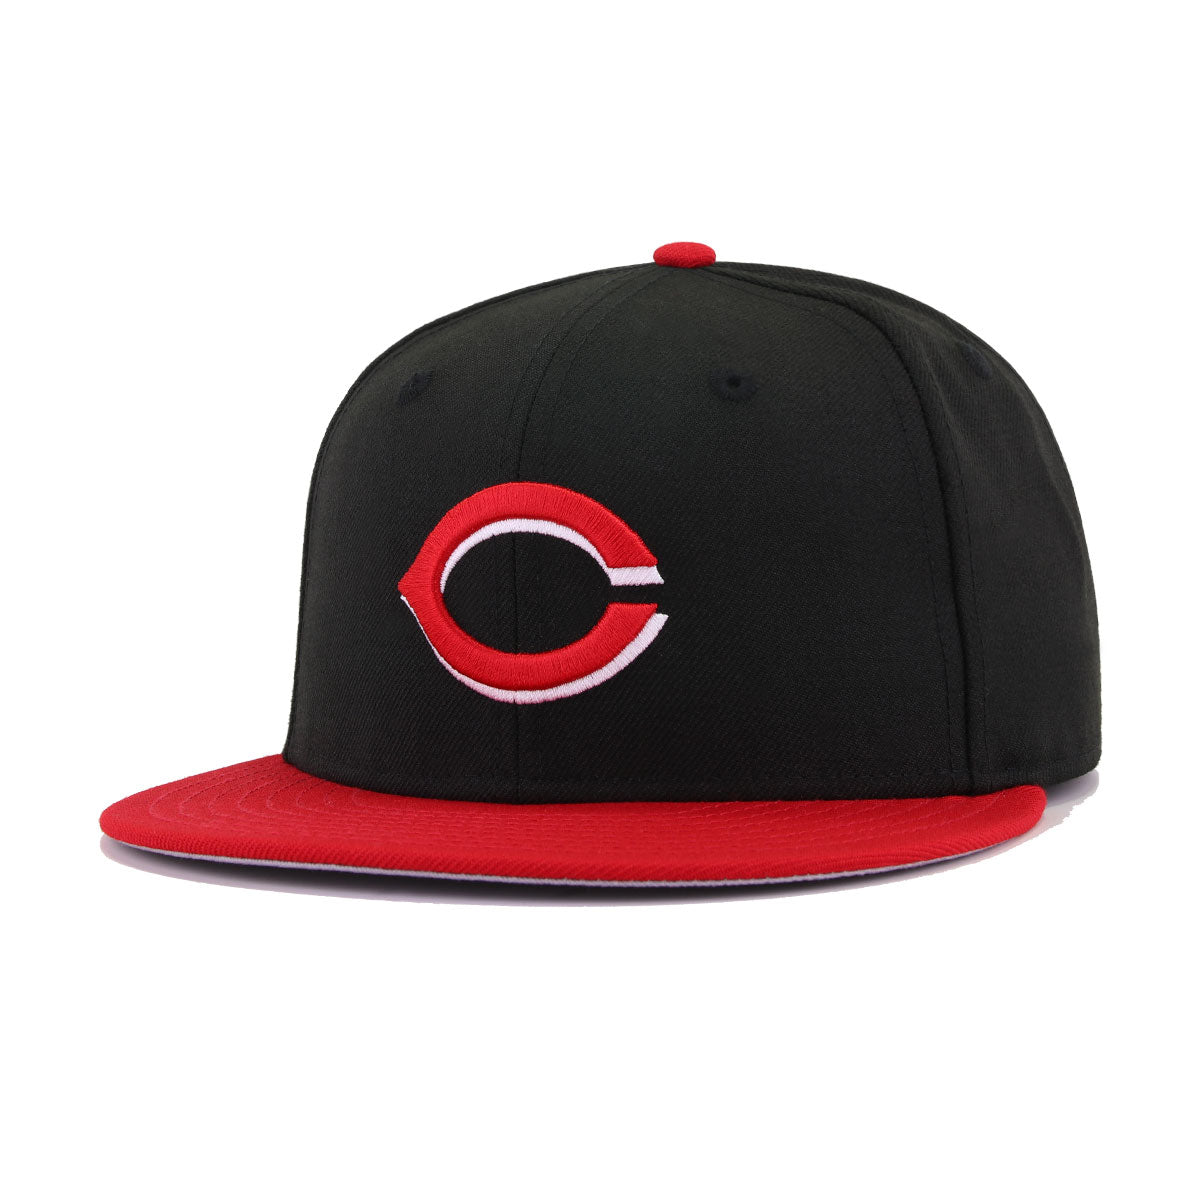 New Era Cincinnati Reds 59FIFTY Authentic Collection Hat Black/Red 7 3/4